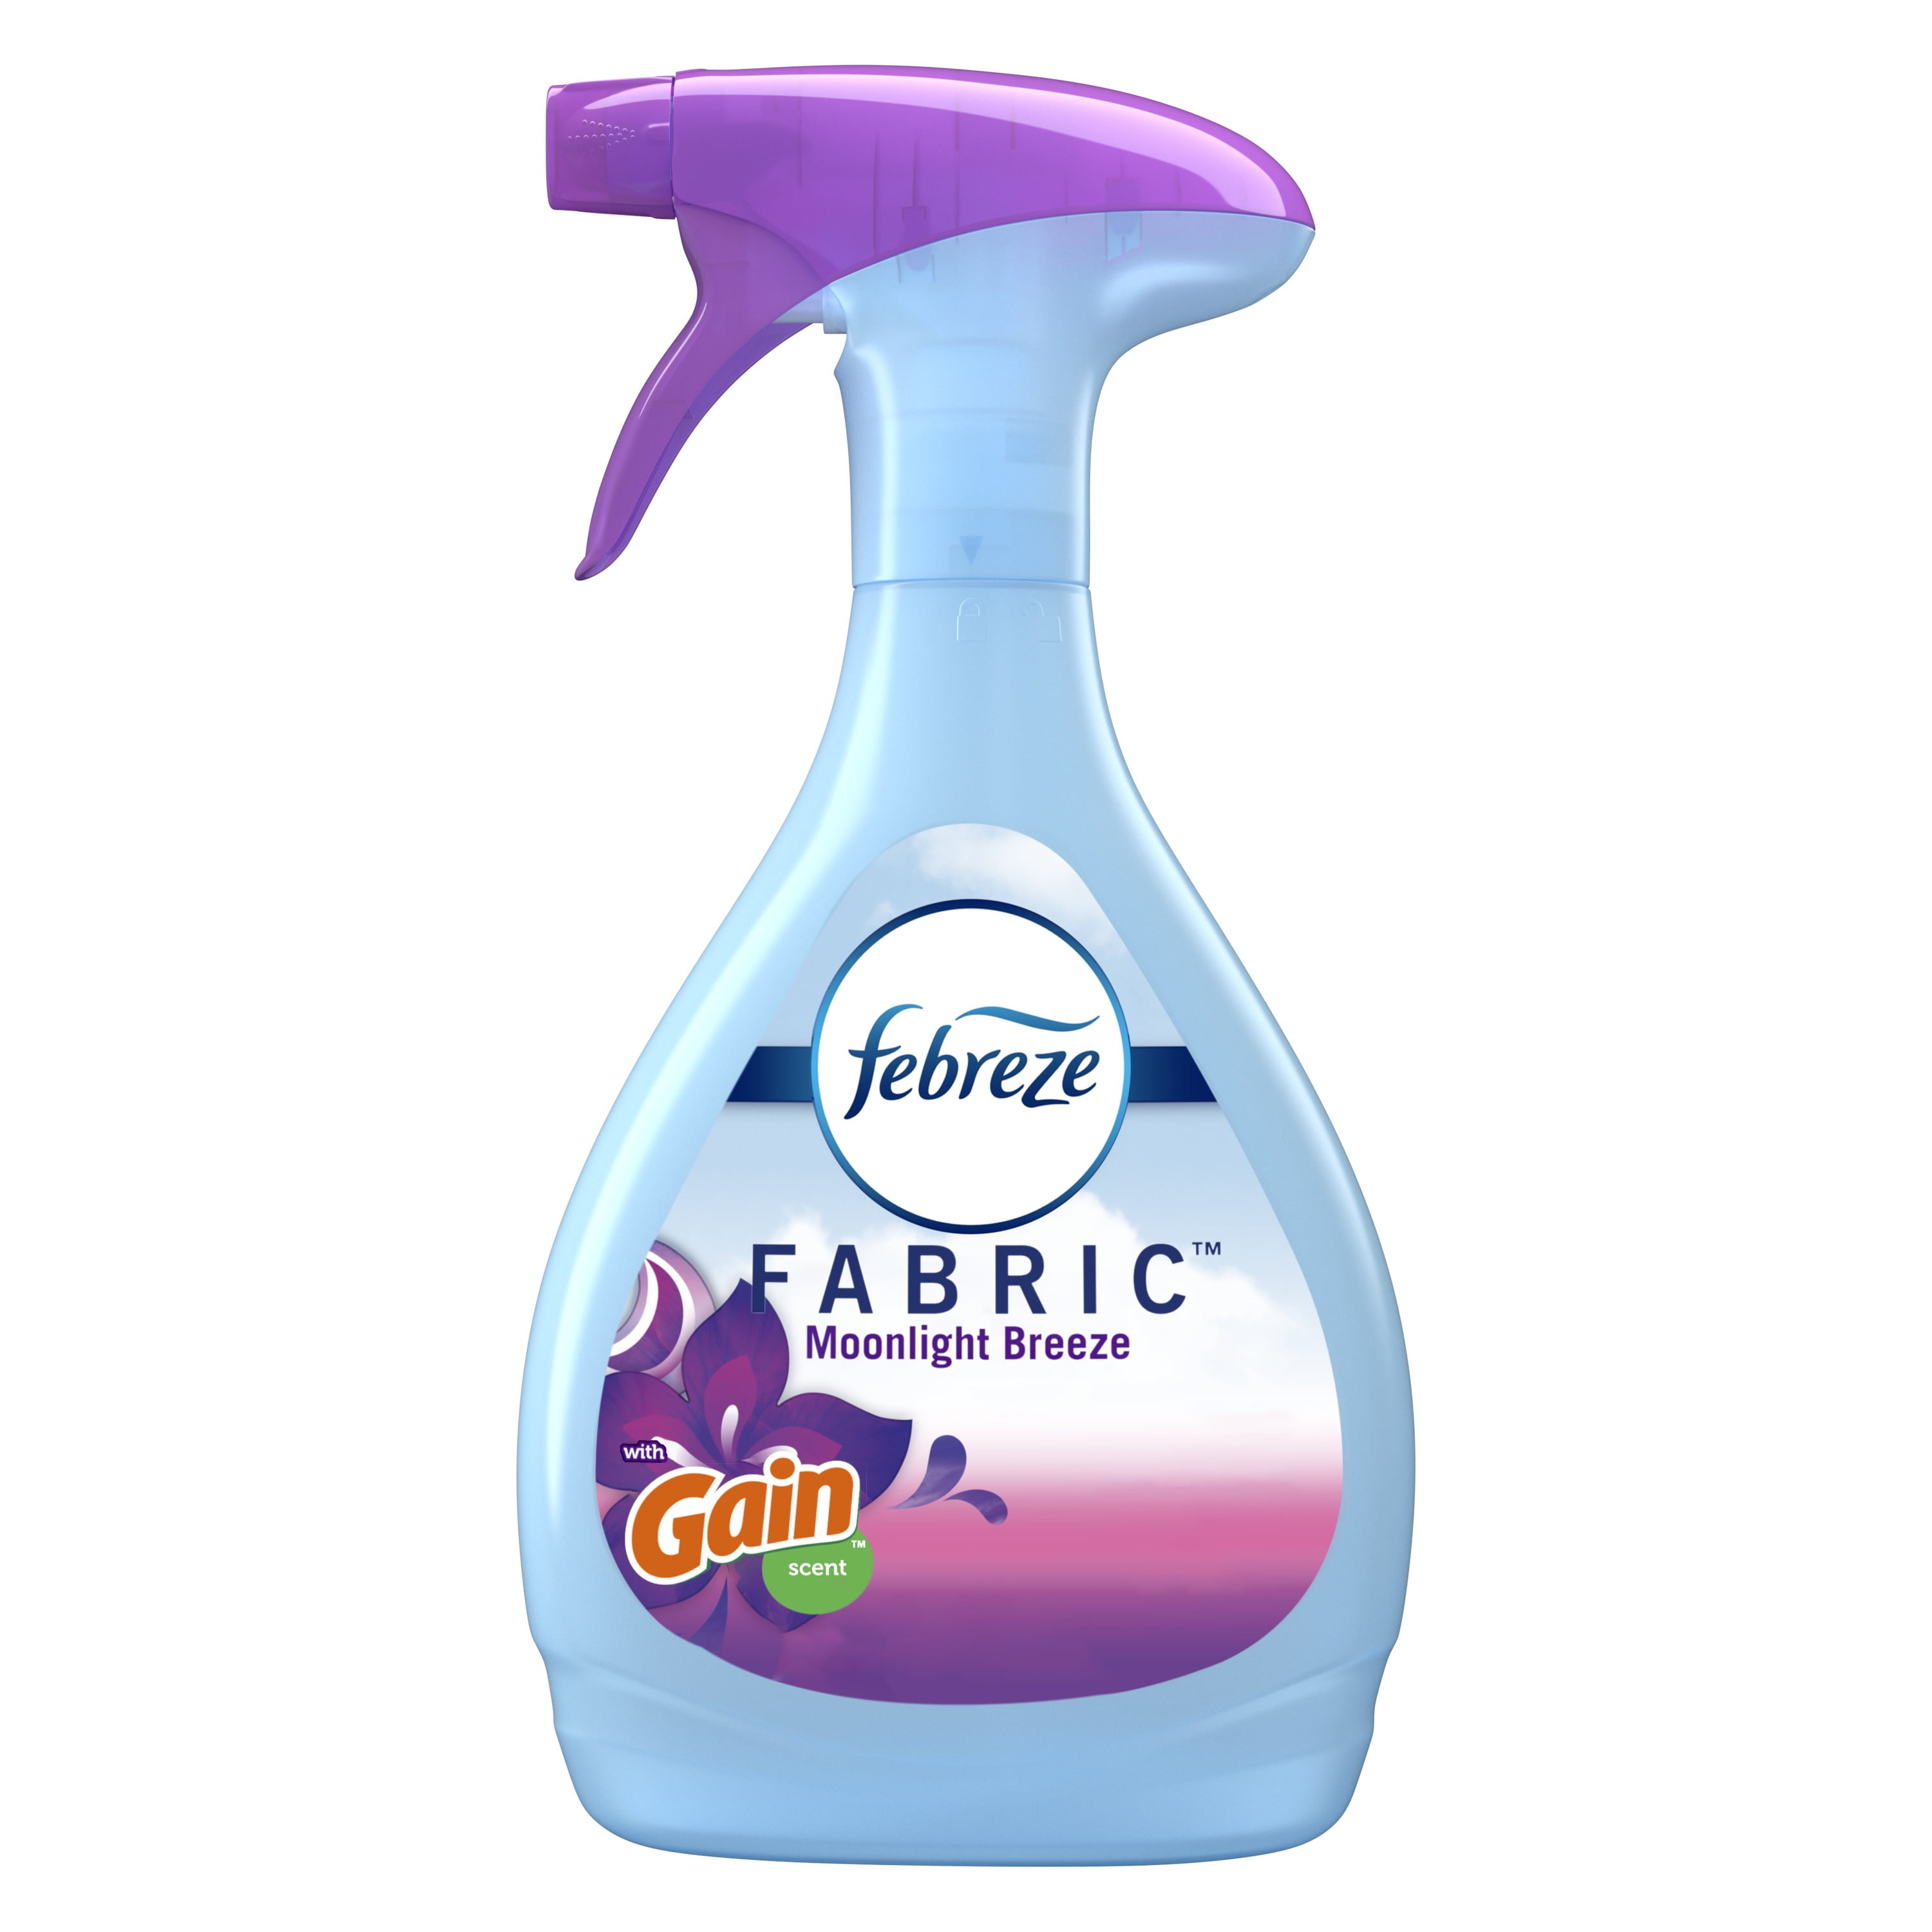 Febreze Air Refresher - with Gain Moonlight Breeze Scent - with New  OdorClear Technology - Net Wt. 8.8 OZ (250 g) Per Bottle - Pack of 2  Bottles